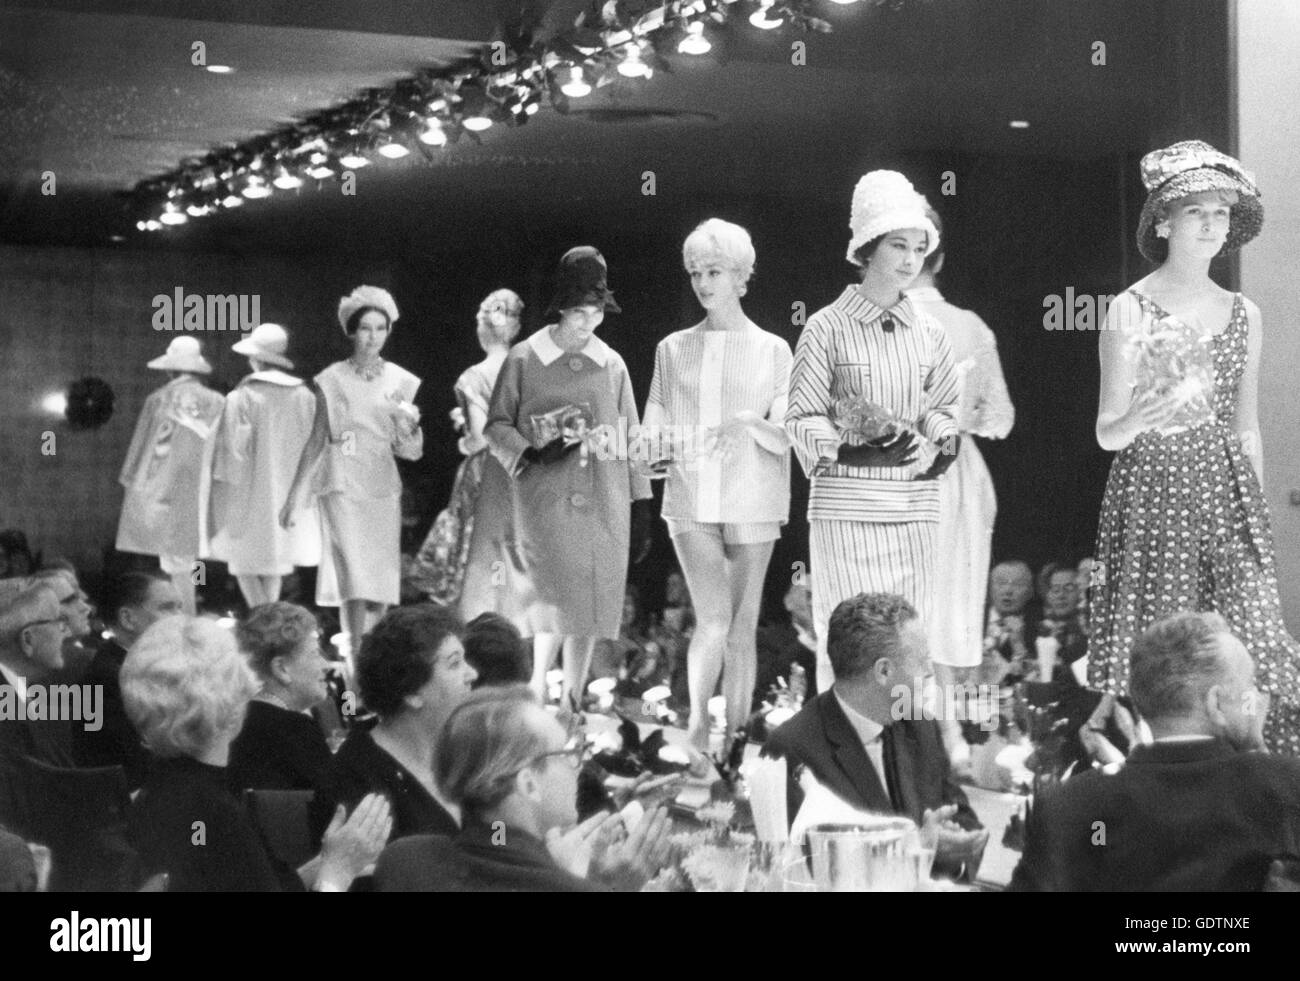 The trevira fashion show of the chemical company Höchst, 1959 Stock Photo